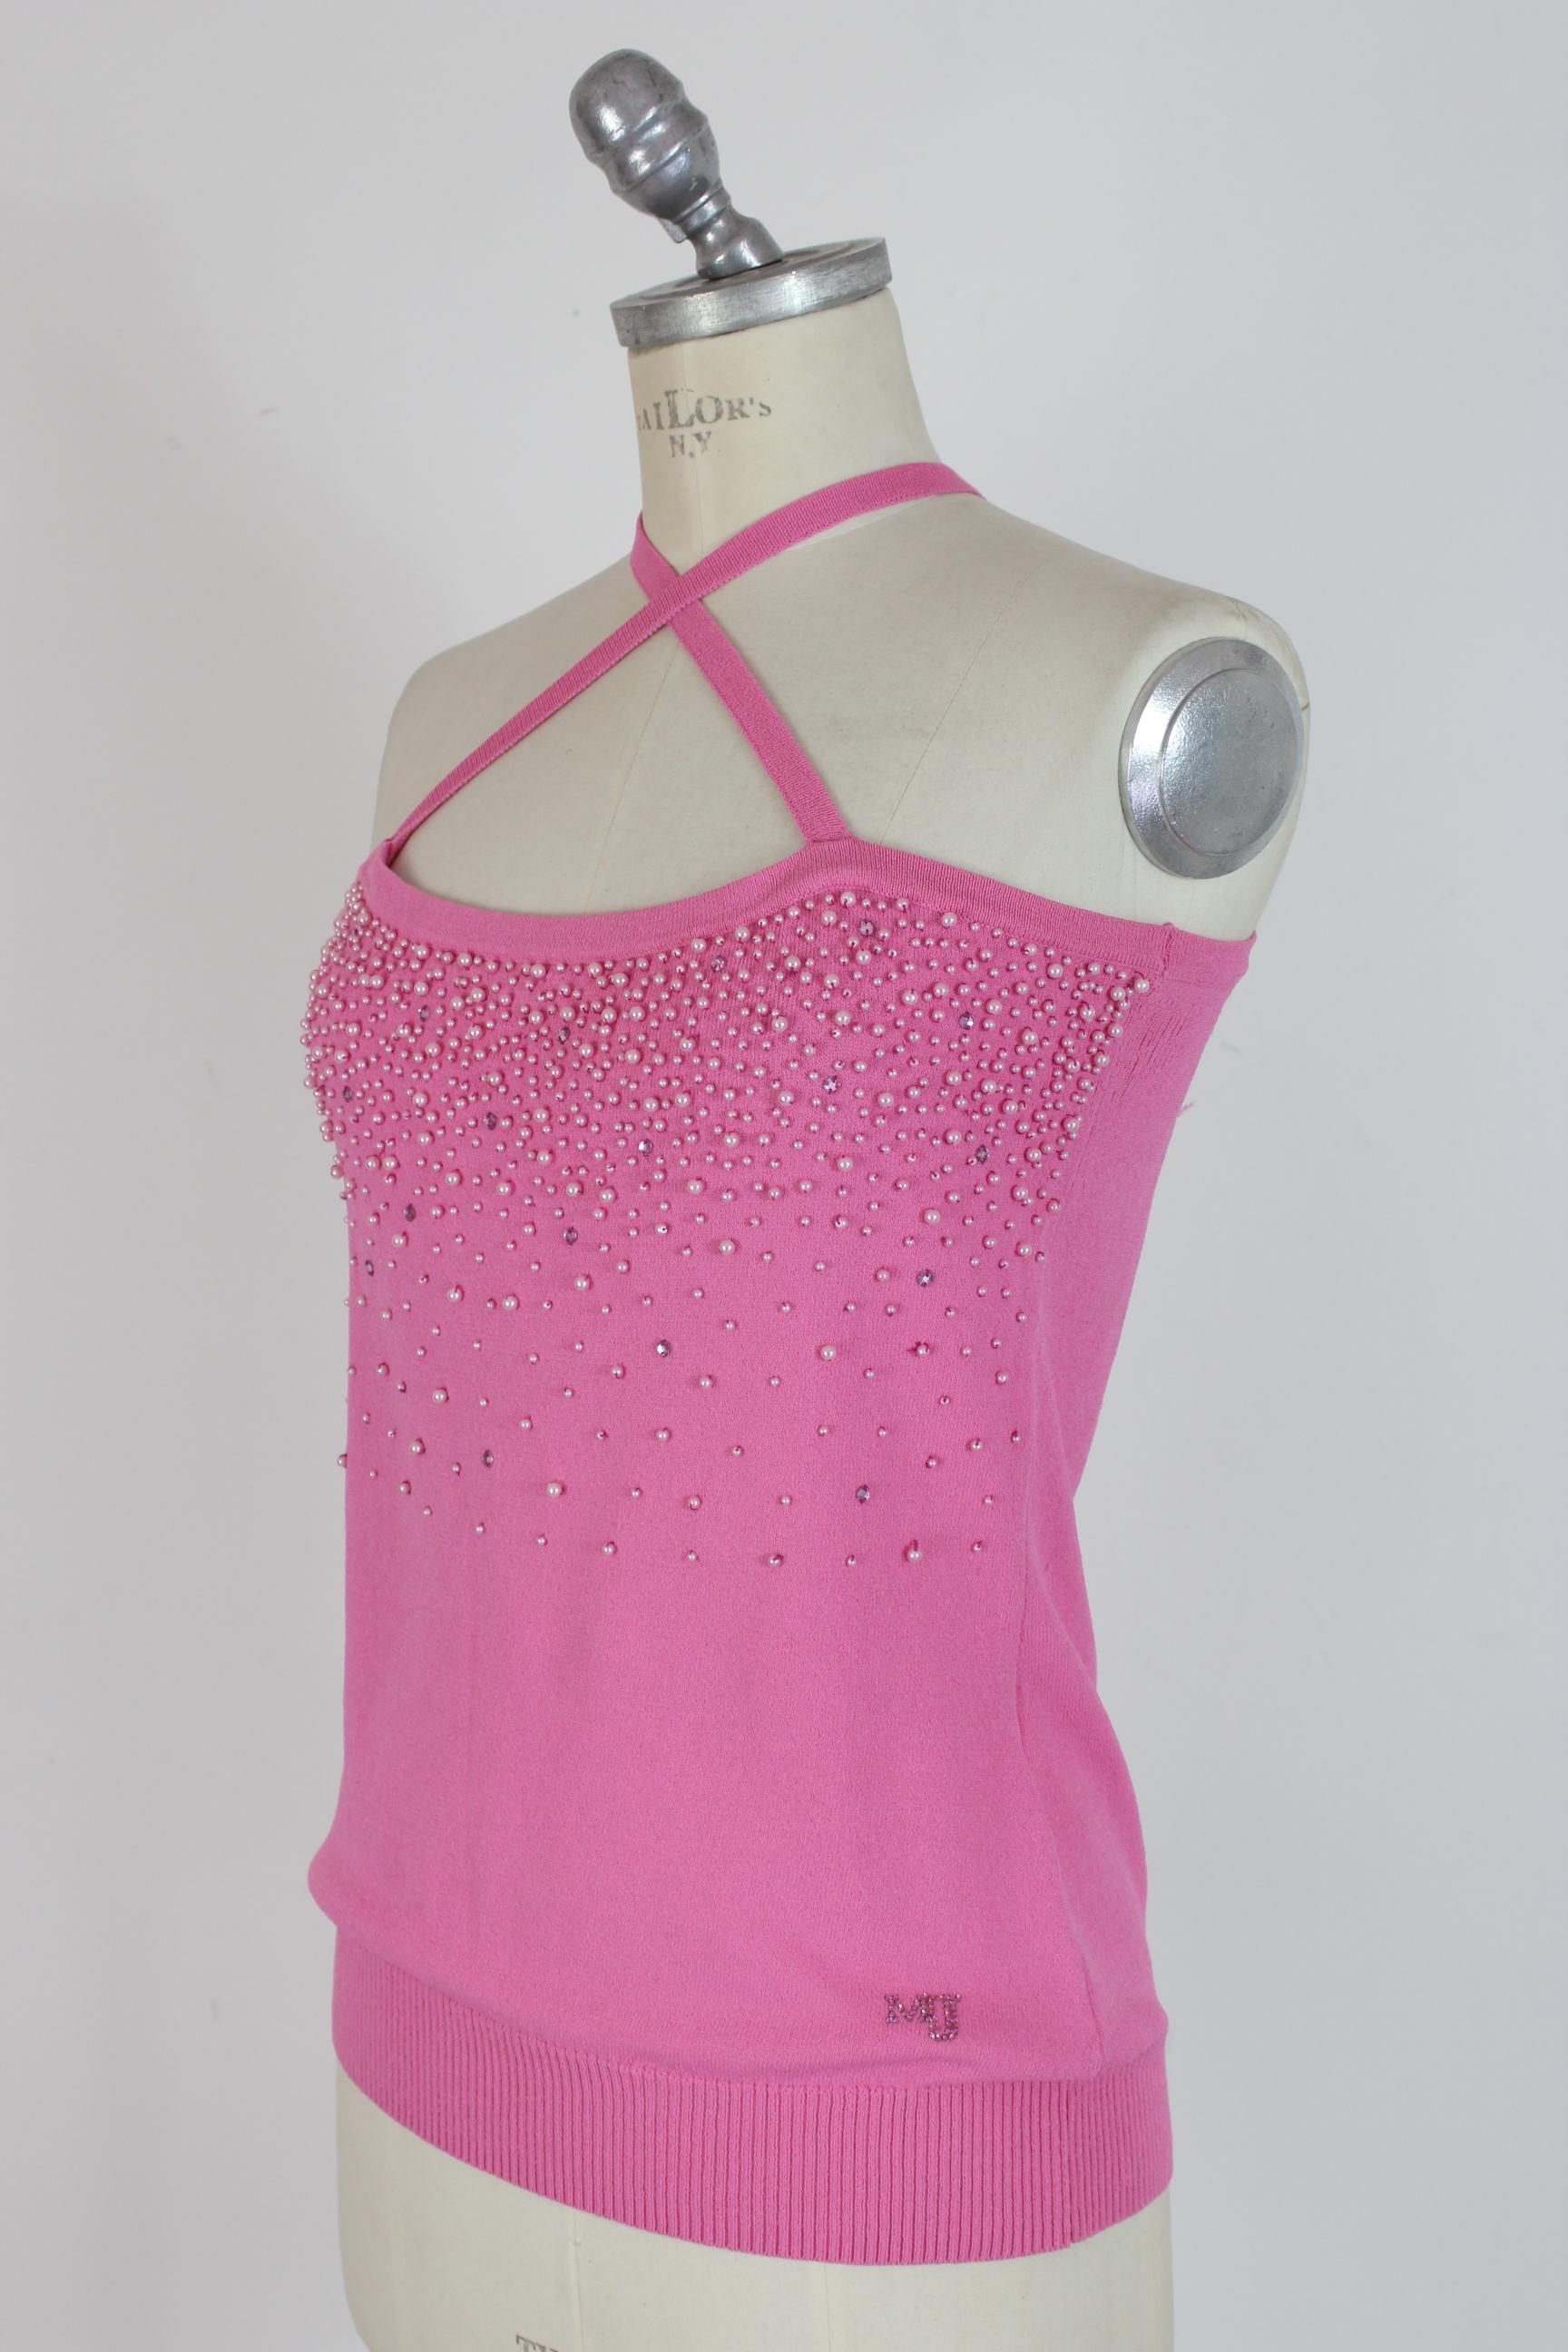 Gai Mattiolo Pink Beaded Sleeveless Shirt Evening Top In Excellent Condition For Sale In Brindisi, Bt